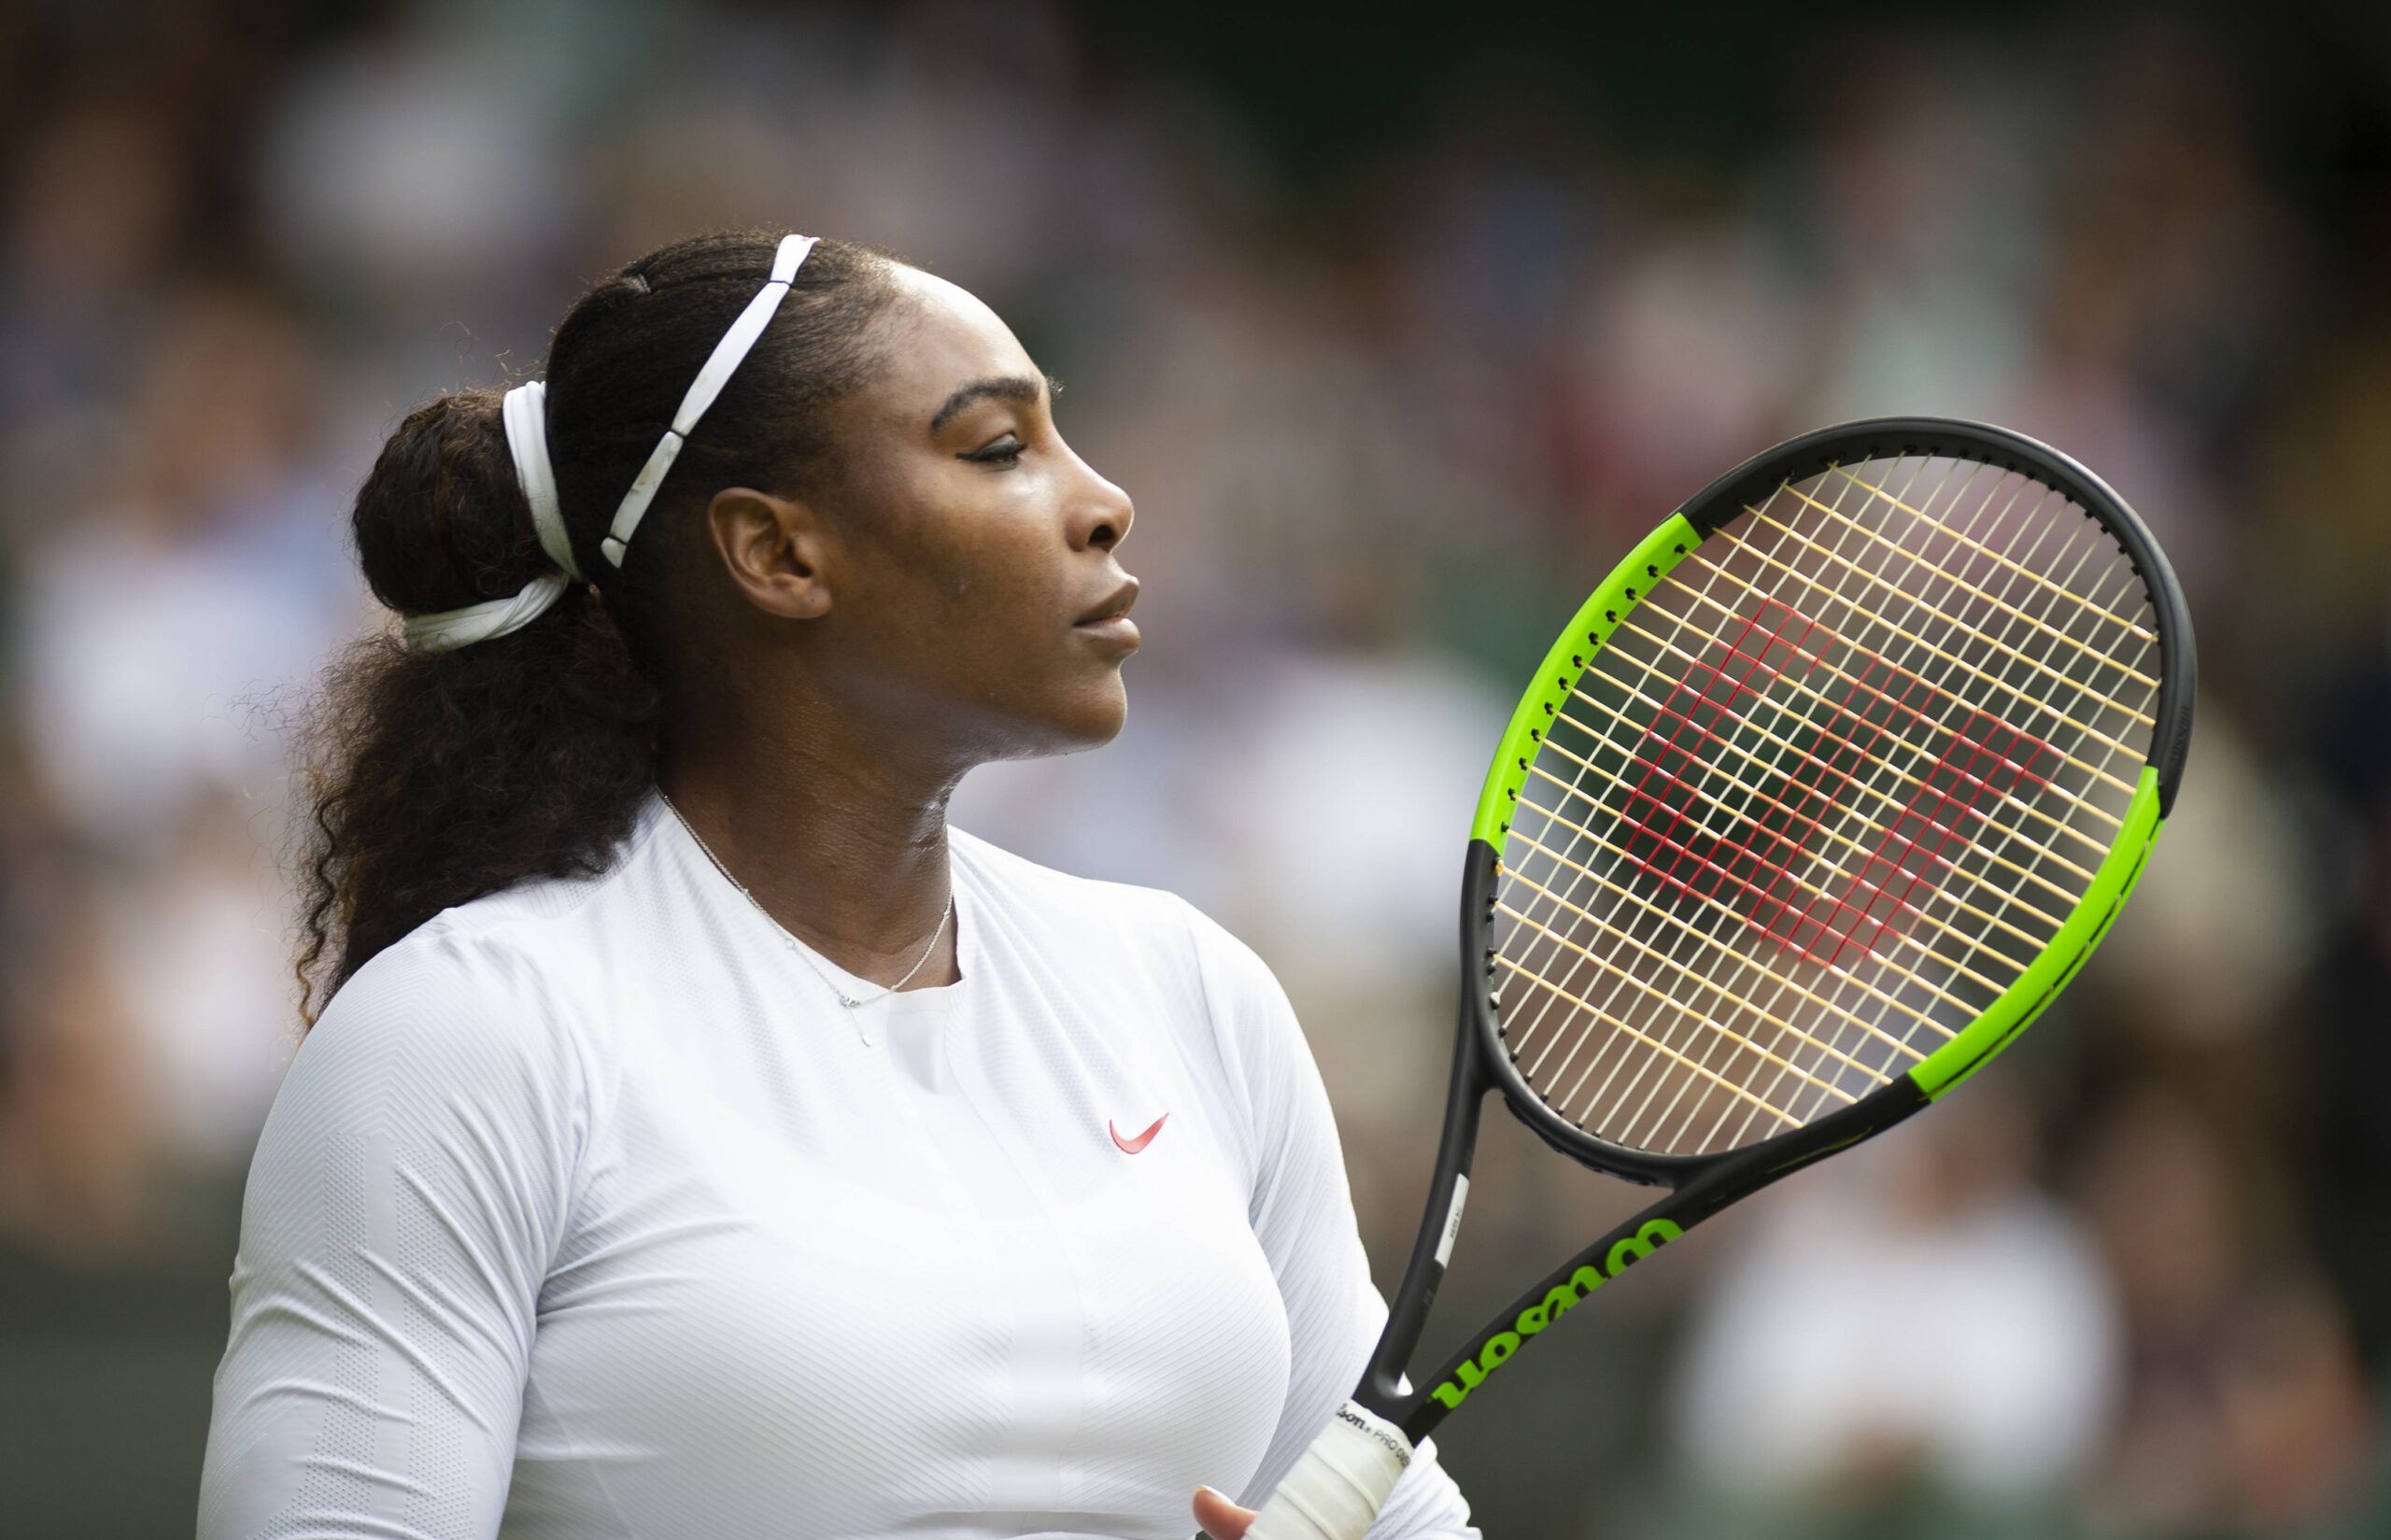 Serena Williams Says Postpartum Emotions Contributed in Historic Tennis Loss